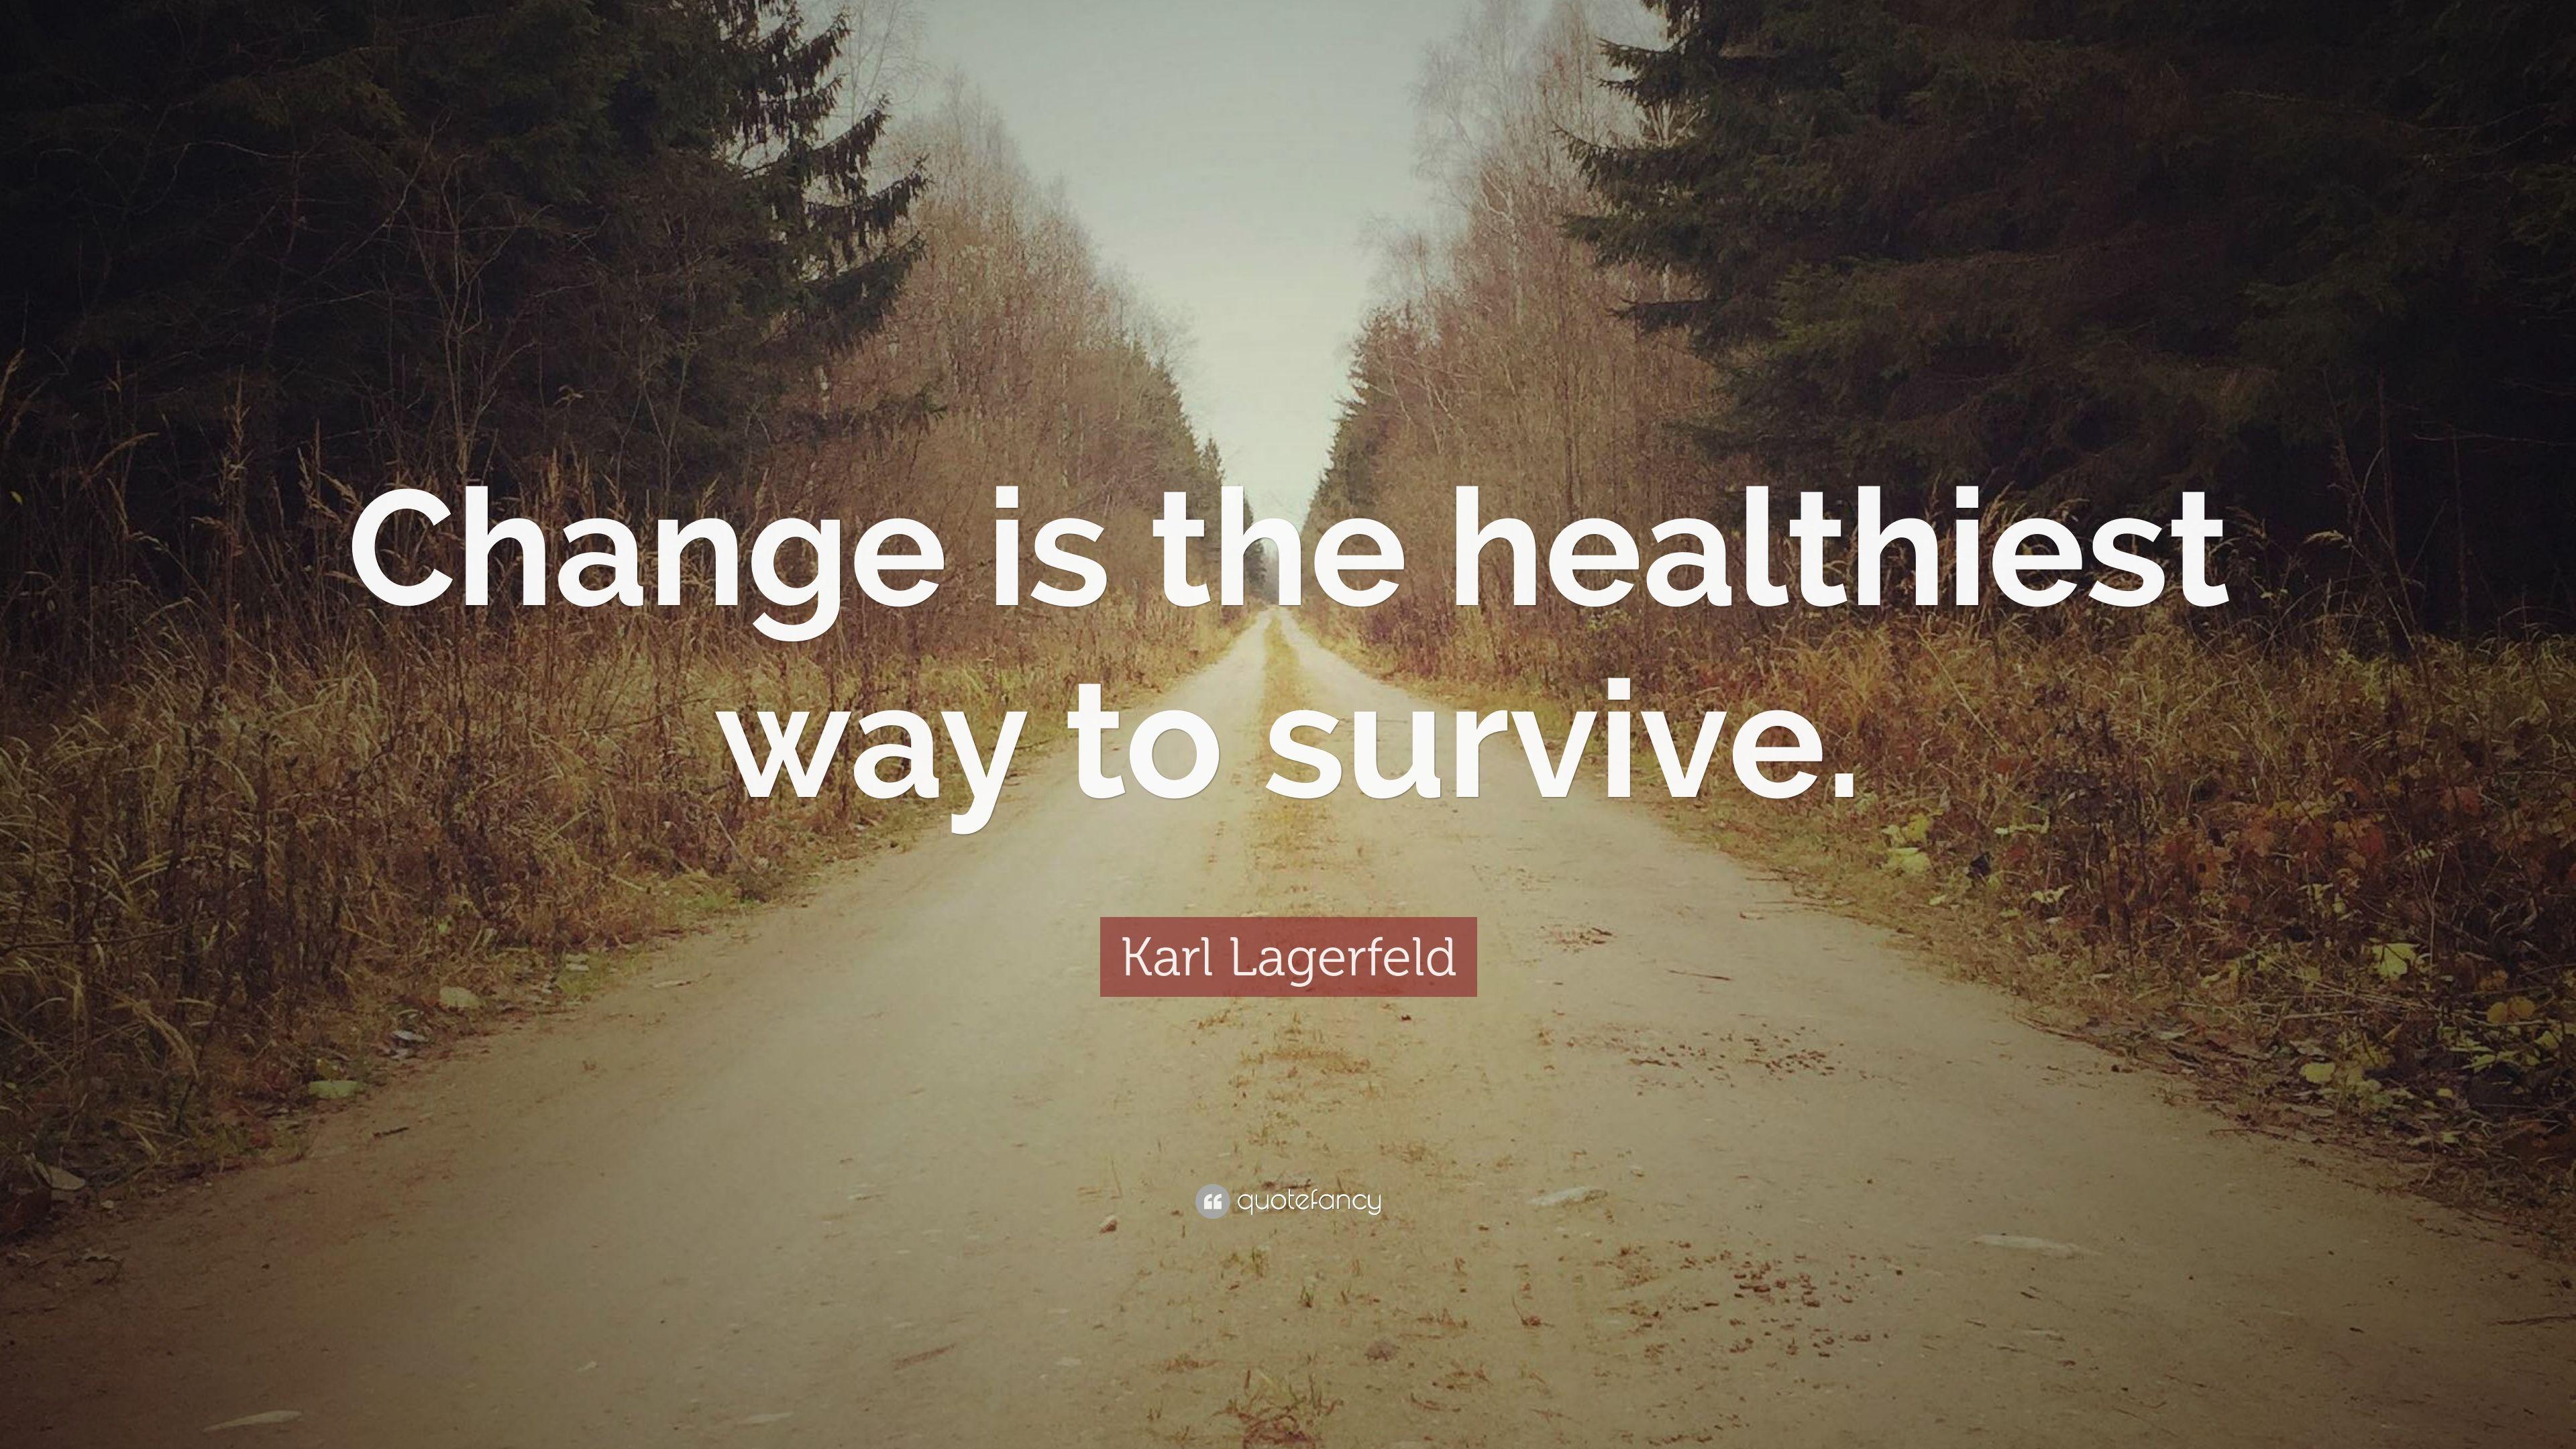 Karl Lagerfeld Quote: “Change is the healthiest way to survive.” 12